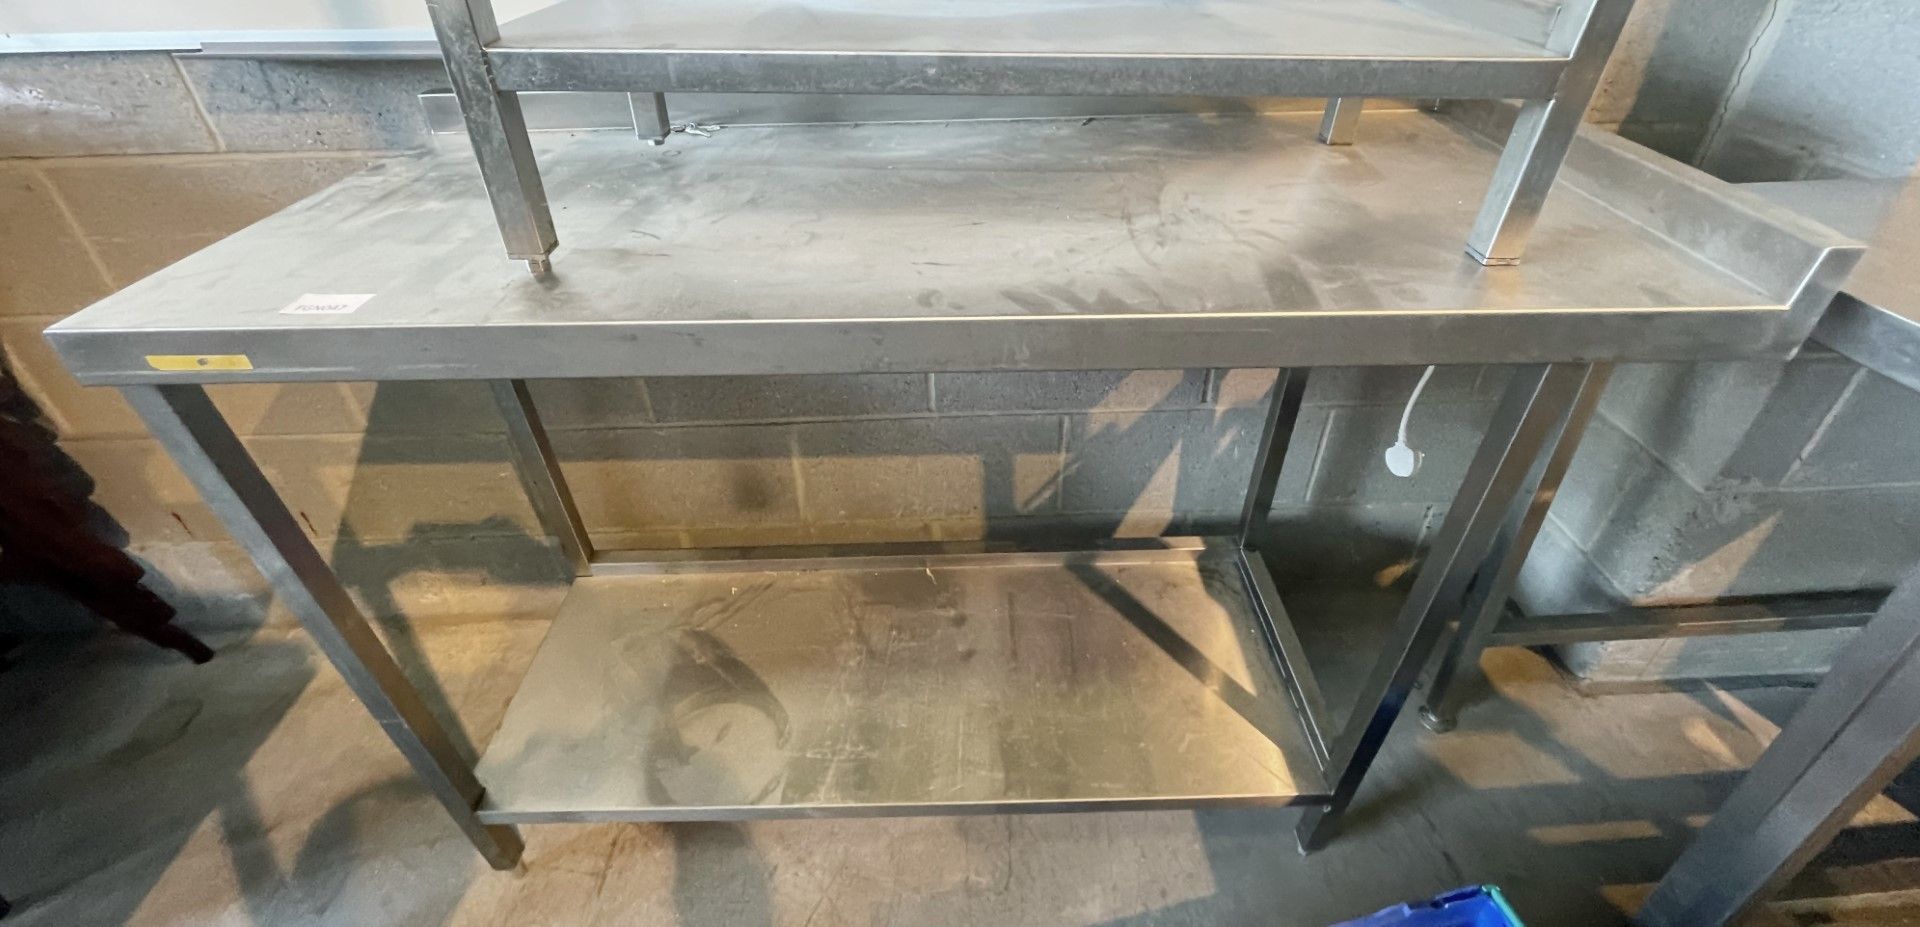 1 x Stainless Steel Prep Table With Corner Upstand and Undershelf - Dimensions: H92 x W130 x D53 cms